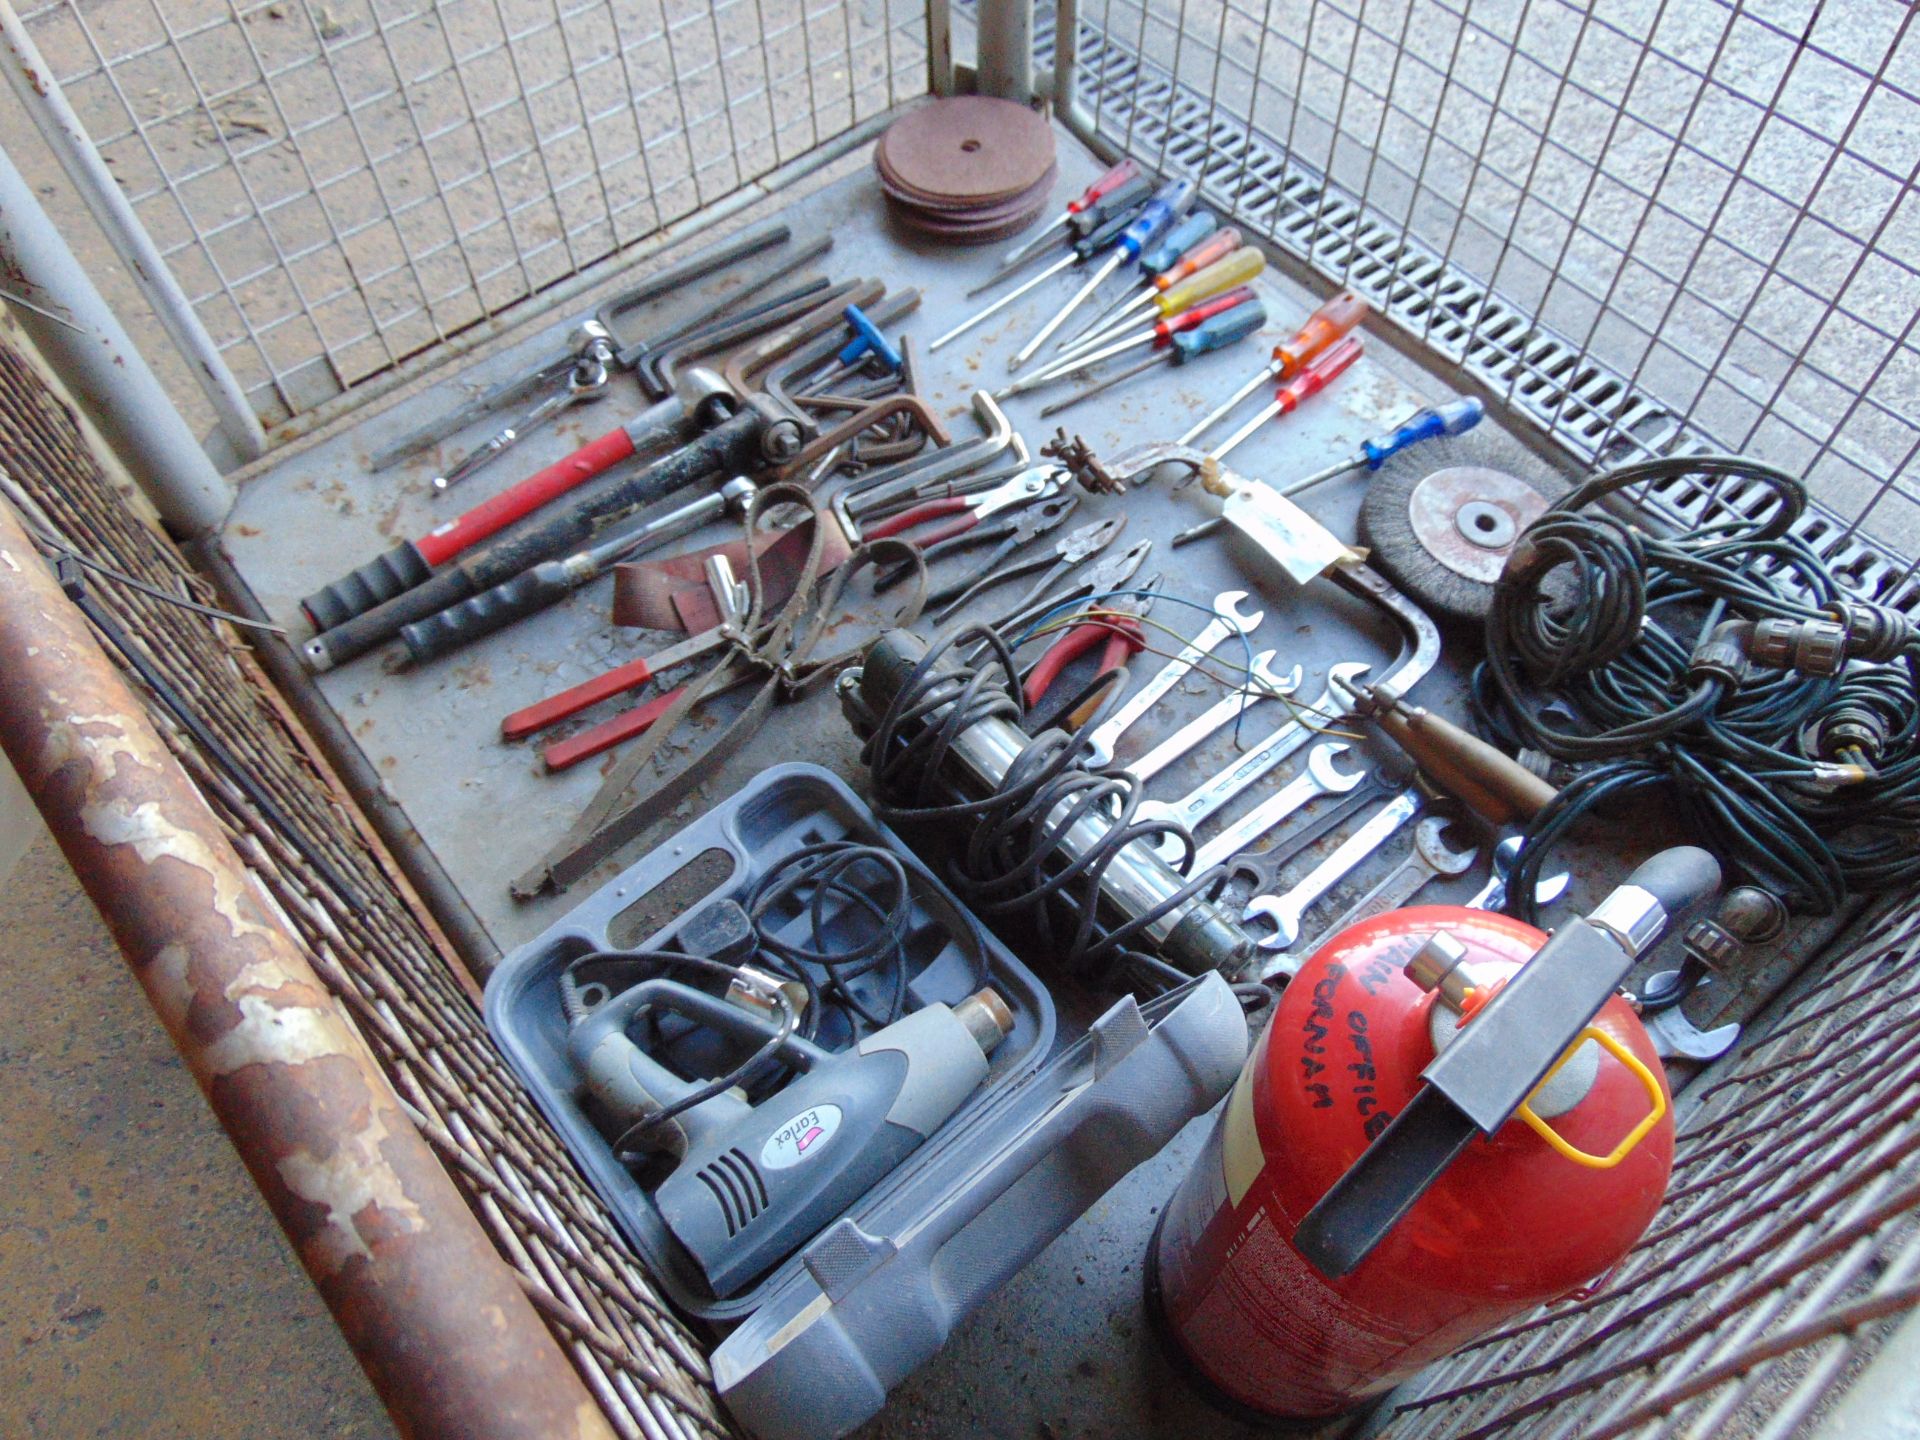 1 x Stillage of Workshop Tools, Spanners, Lights, Torque Wrenches etc - Image 7 of 8